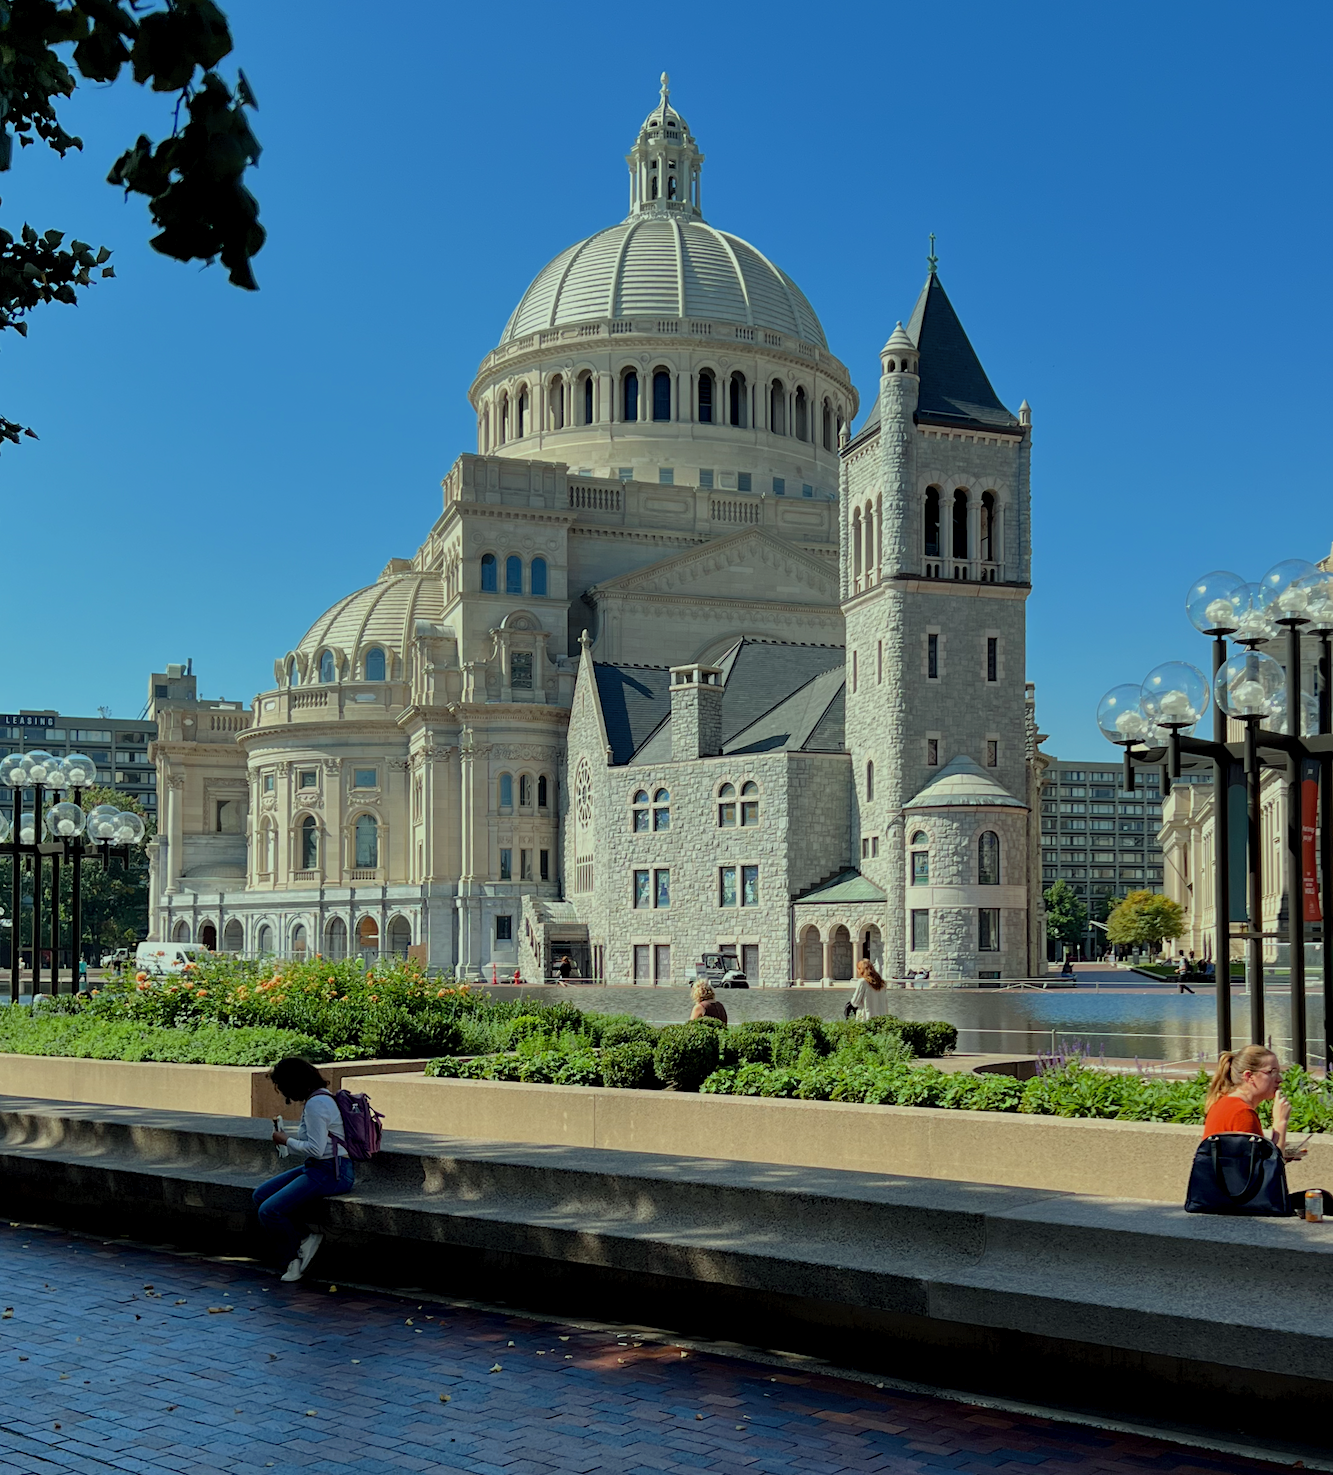 Christian Science Center Boston - Motherchurch - if not one of the ugliest buildings in Boston, one of the most tasteless.